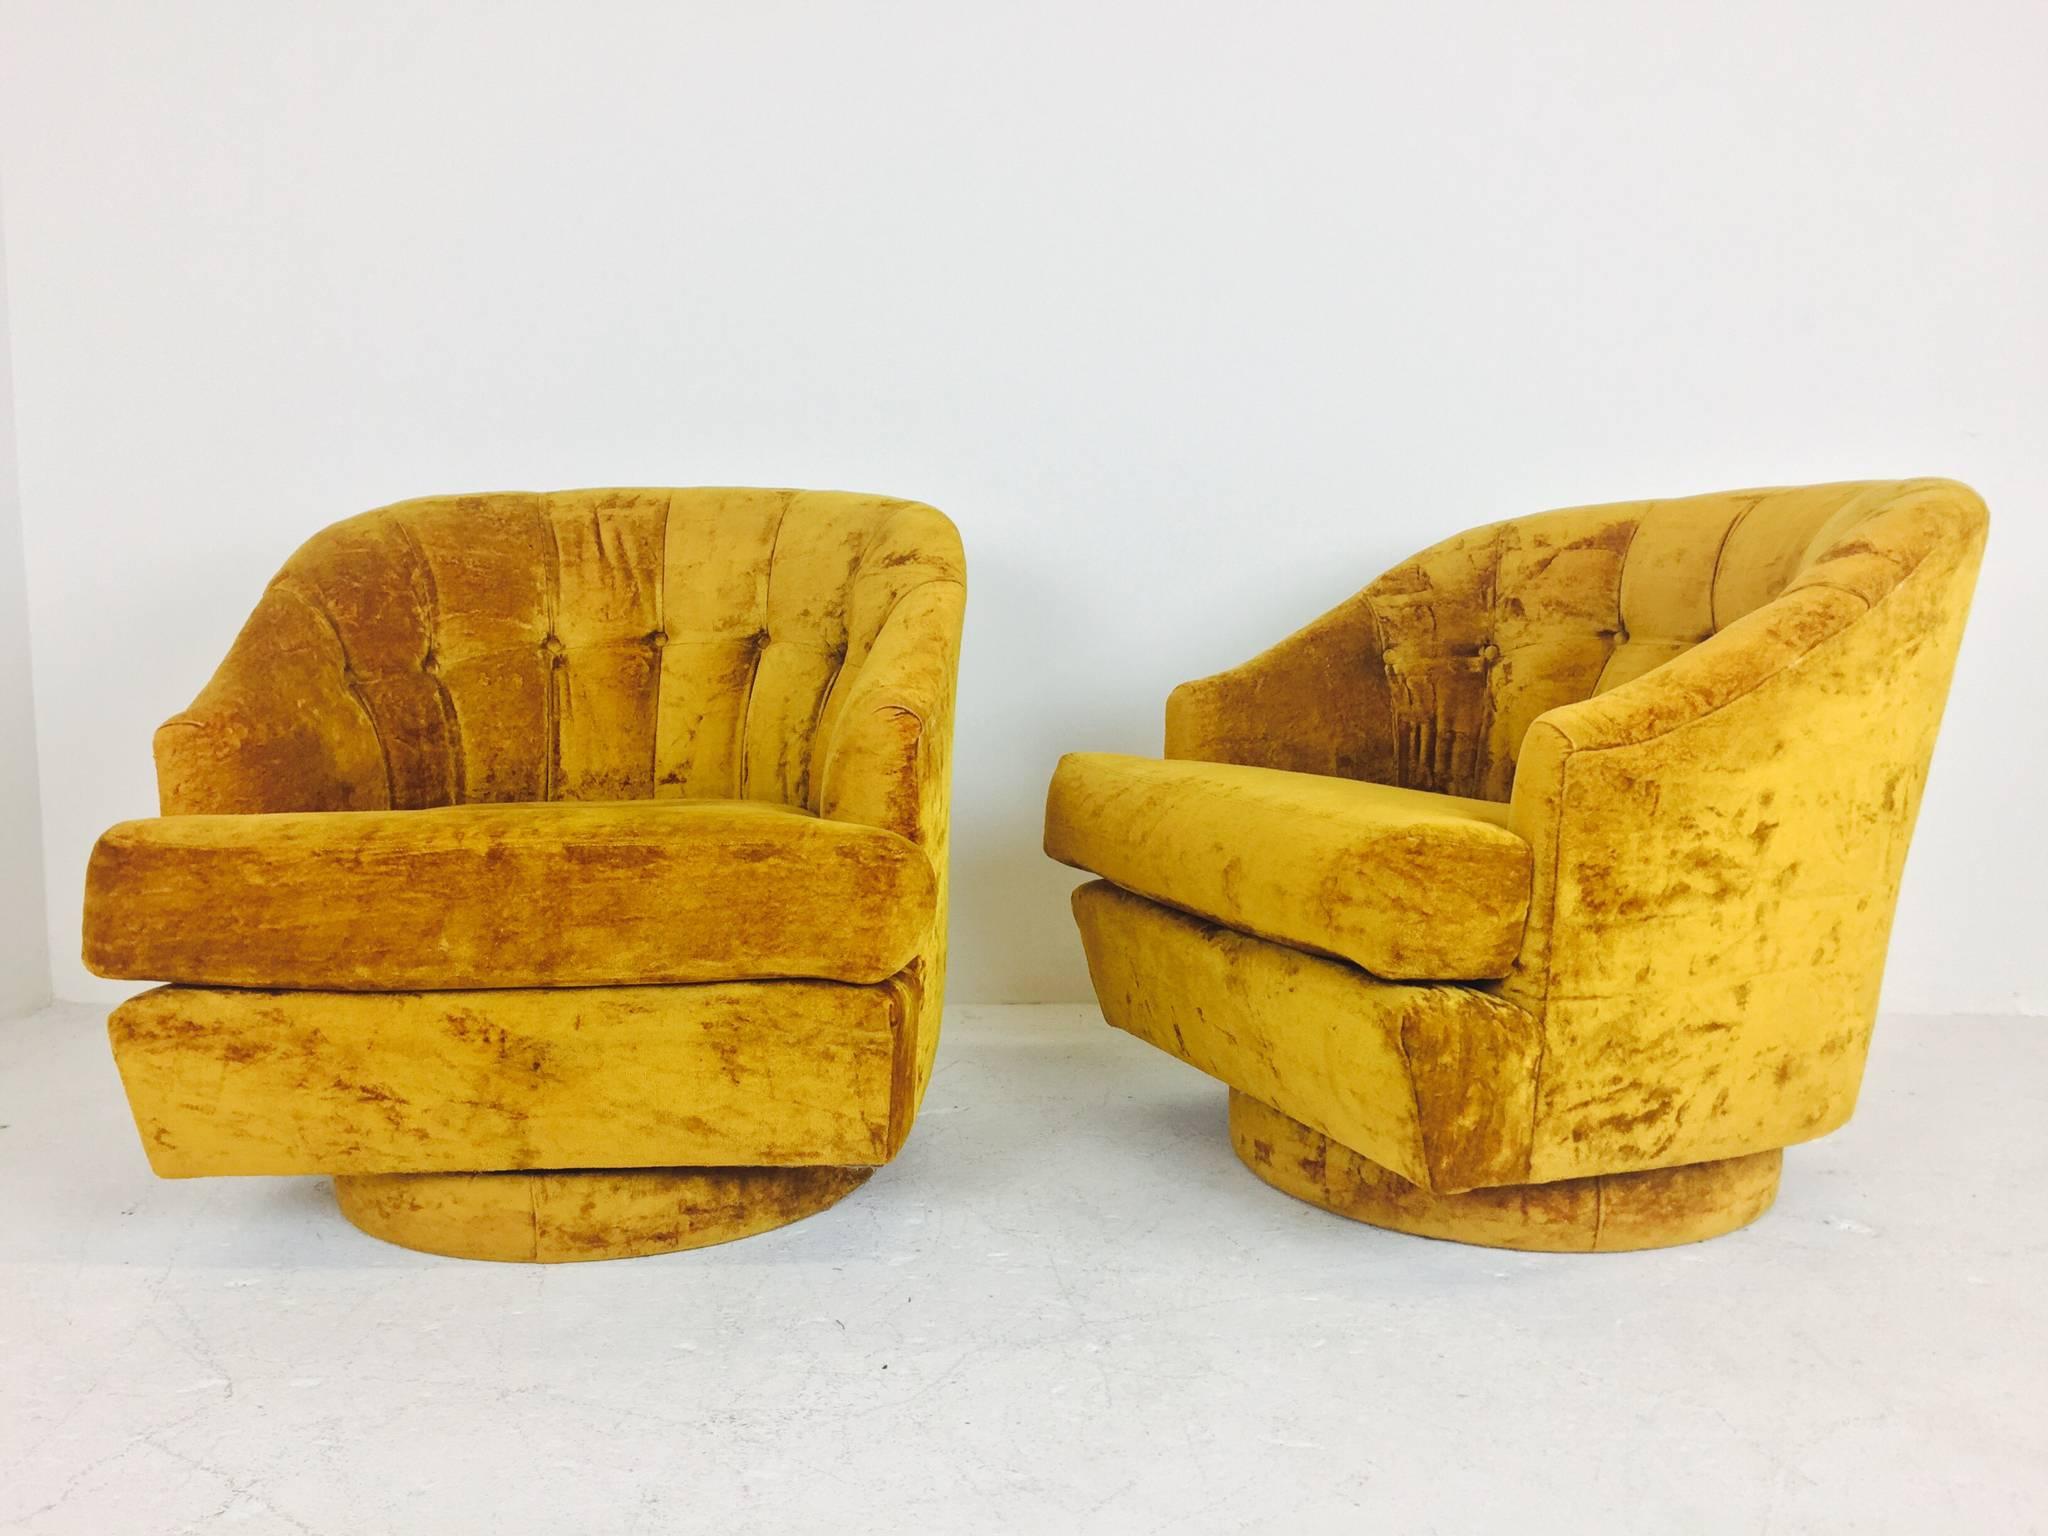 Vintage gold velvet swivel chairs by Directional with original tags. Chairs are in excellent vintage condition but refinishing is recommended.

Dimensions: 28" W x 31" D x 28" T, 
seat height 17".